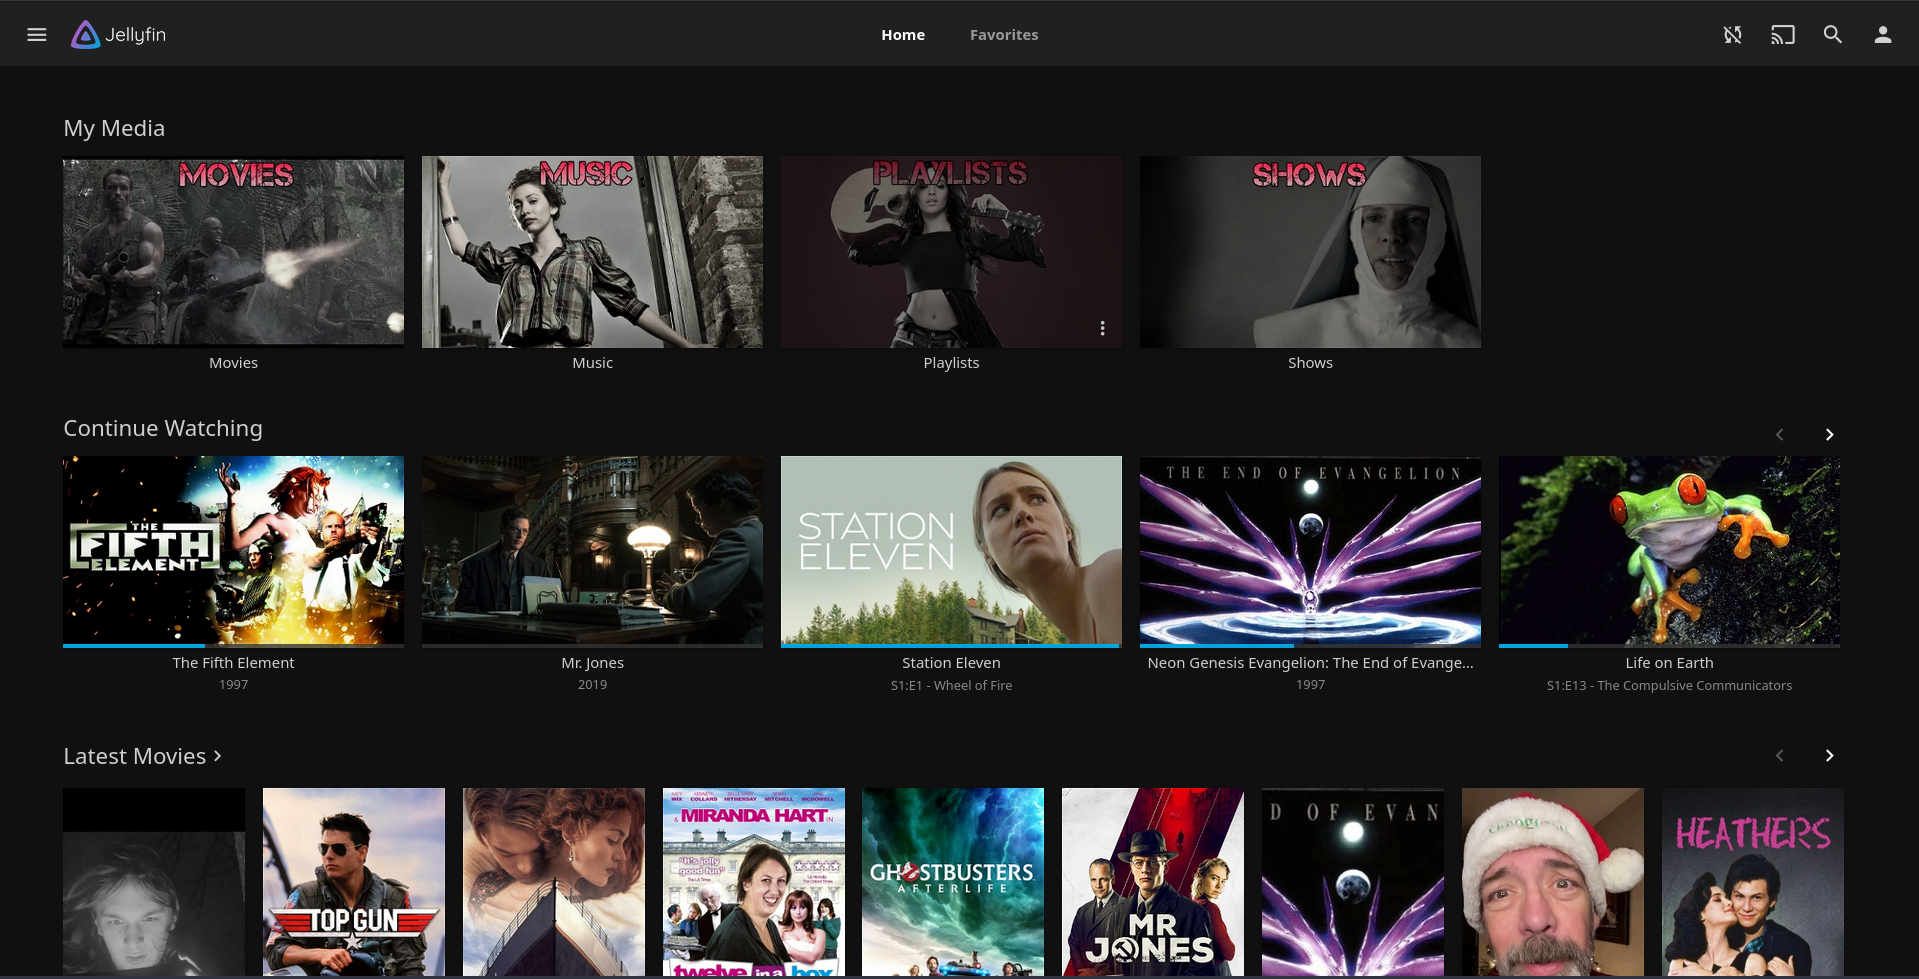 Jellyfin homescreen with sections for films, music, audiobooks and YV shows